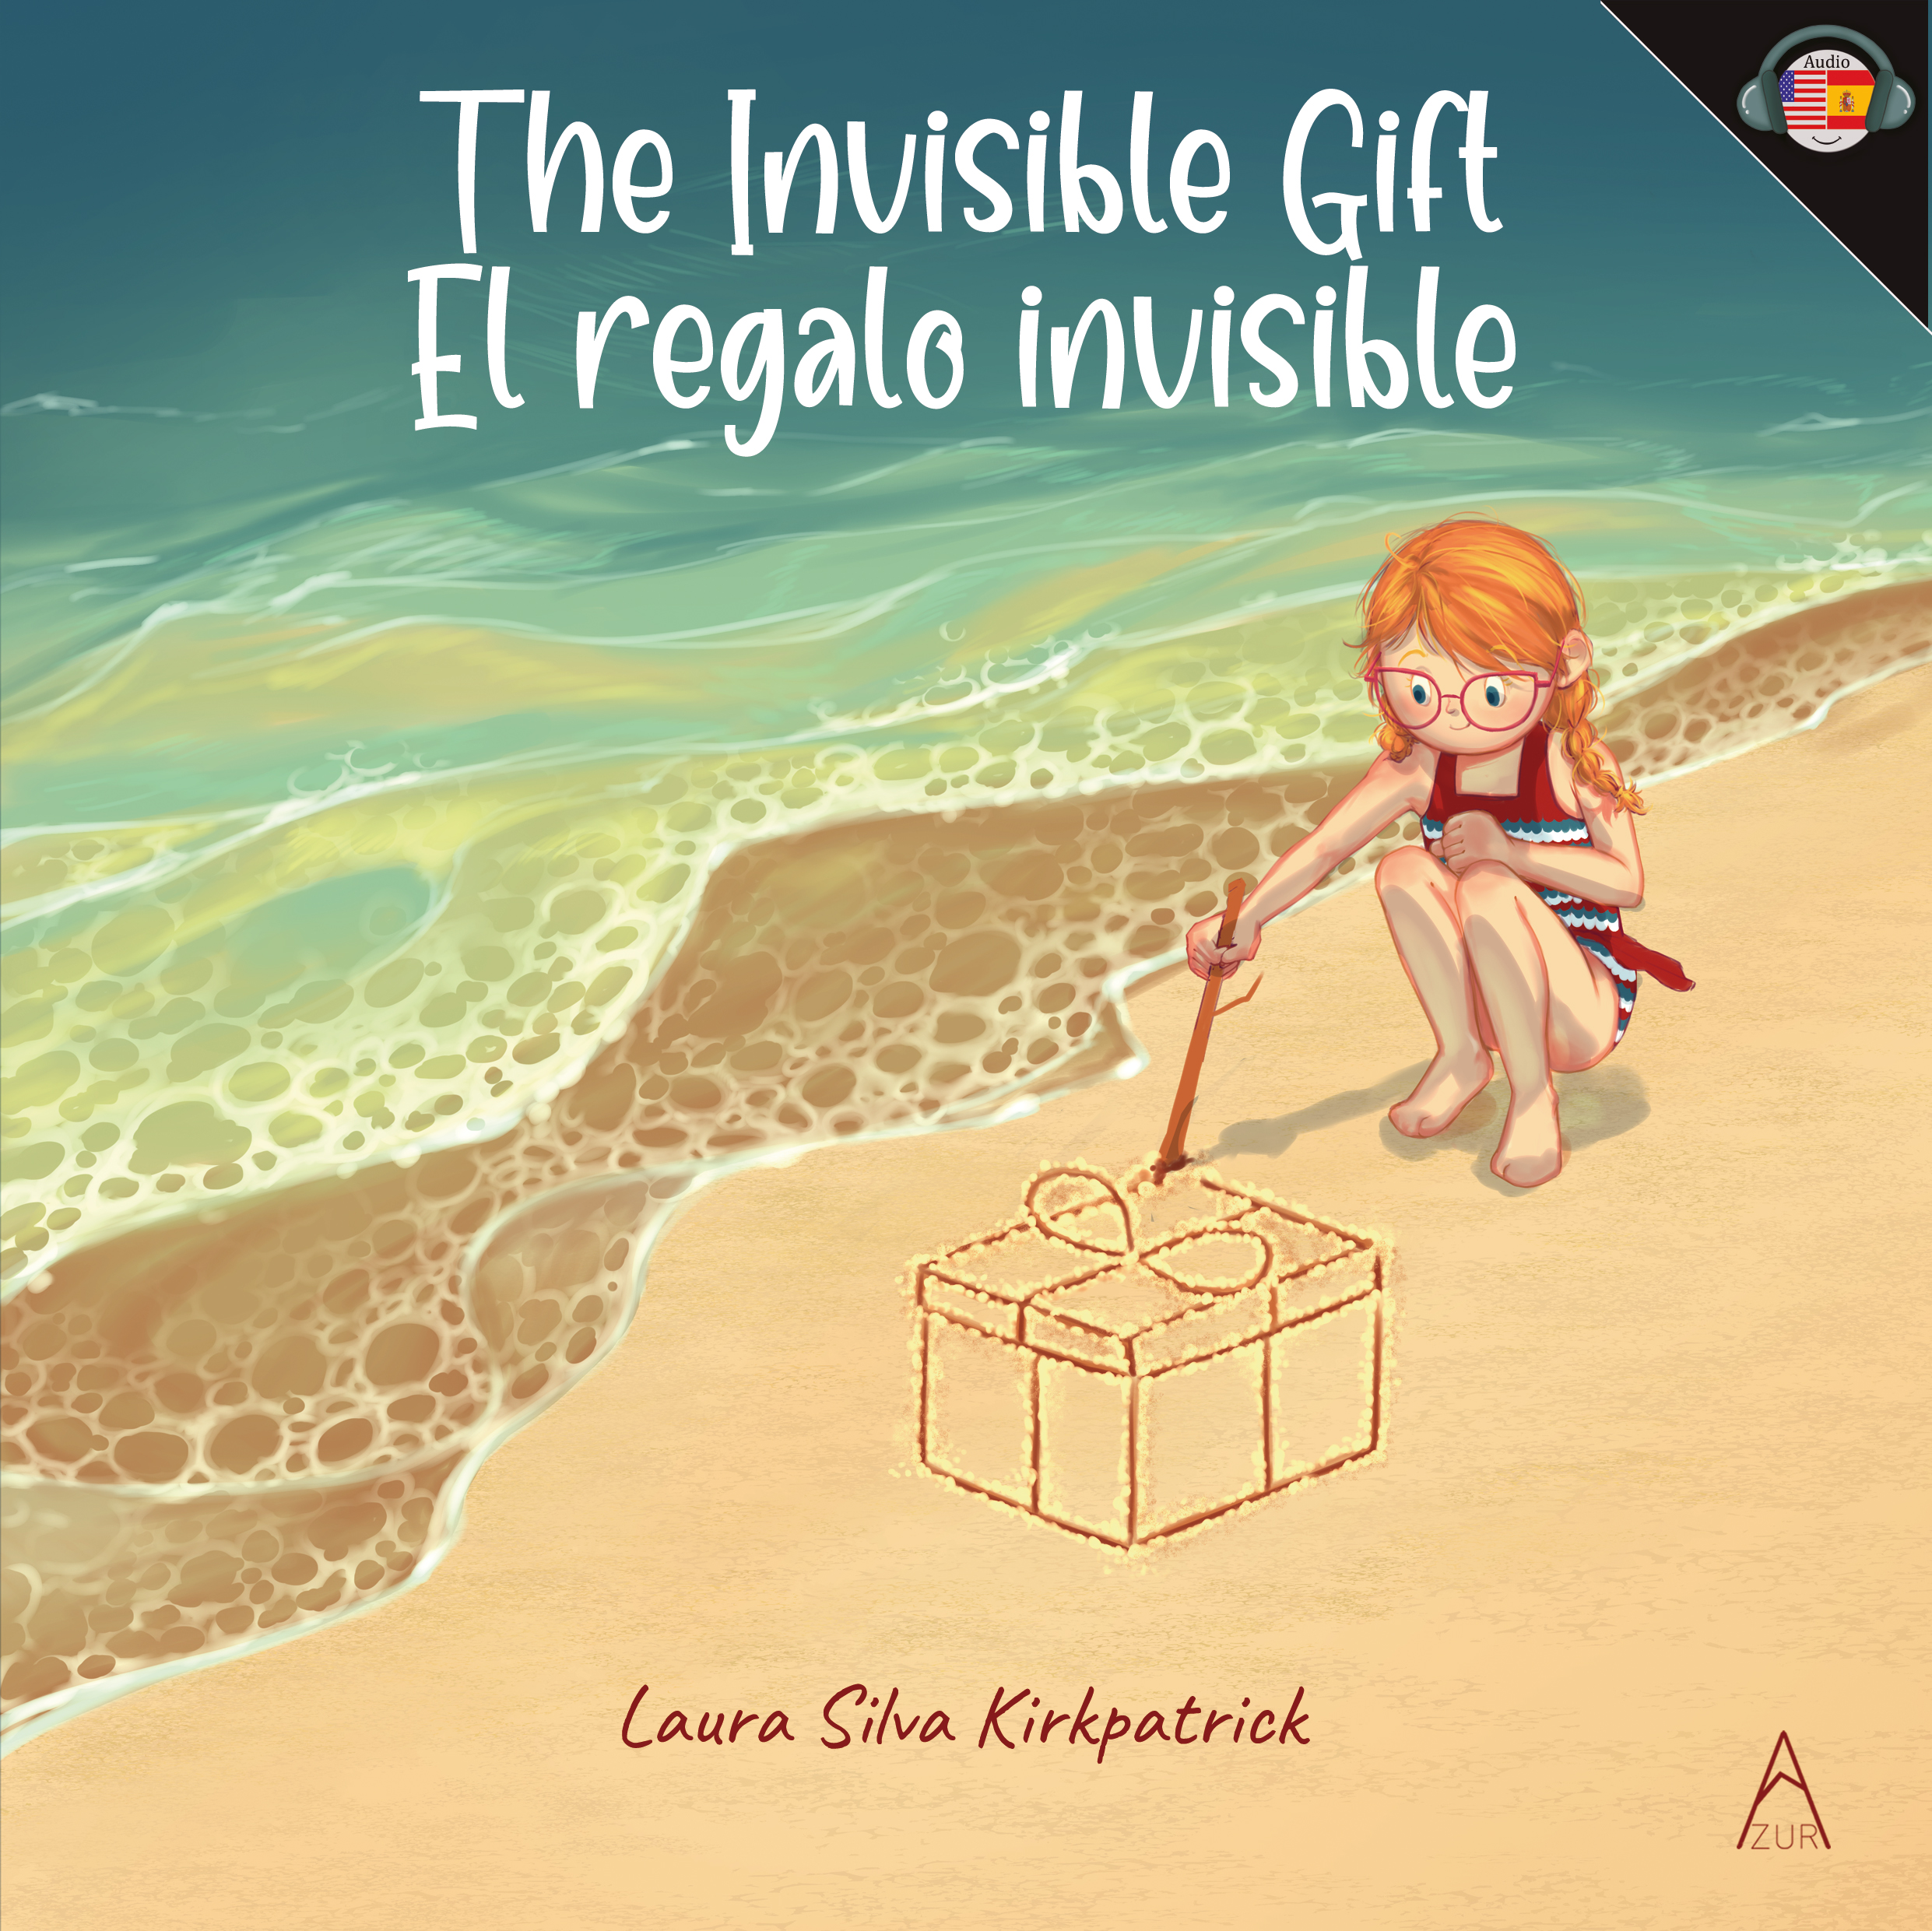 The invisible gift